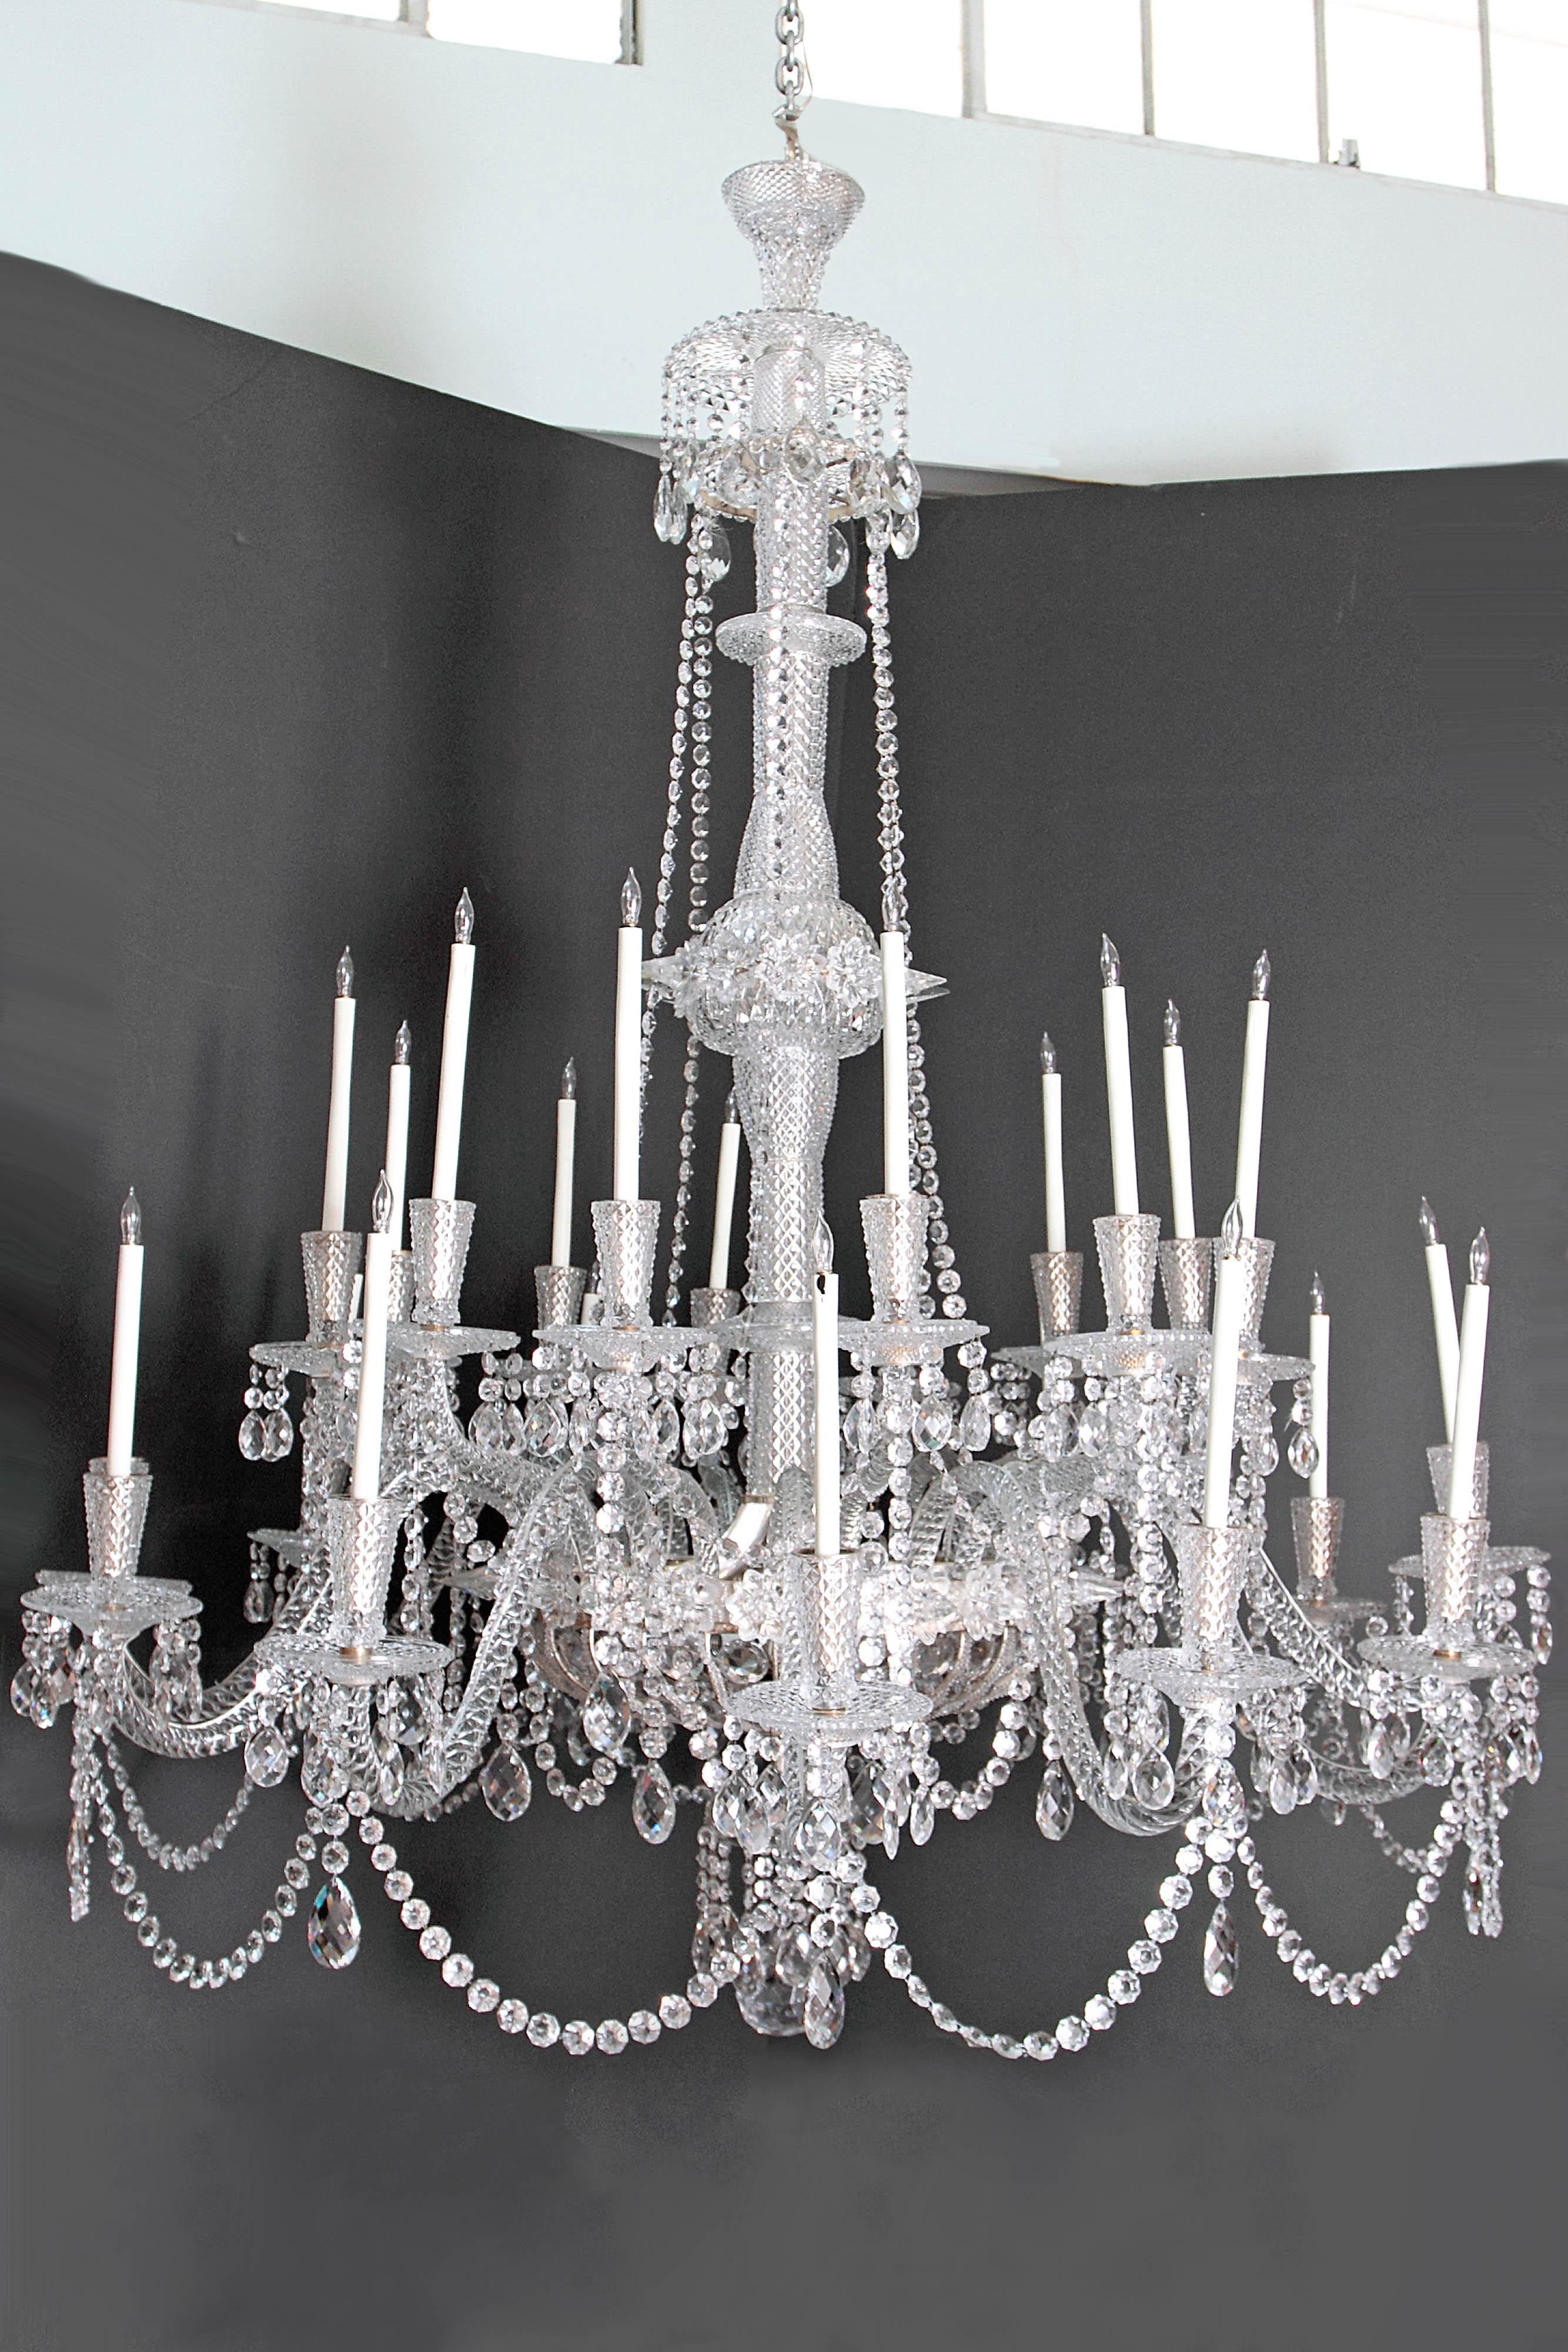 Pair of Grand Scale Mid-Victorian 24-Light Cut-Crystal Chandeliers For Sale 4